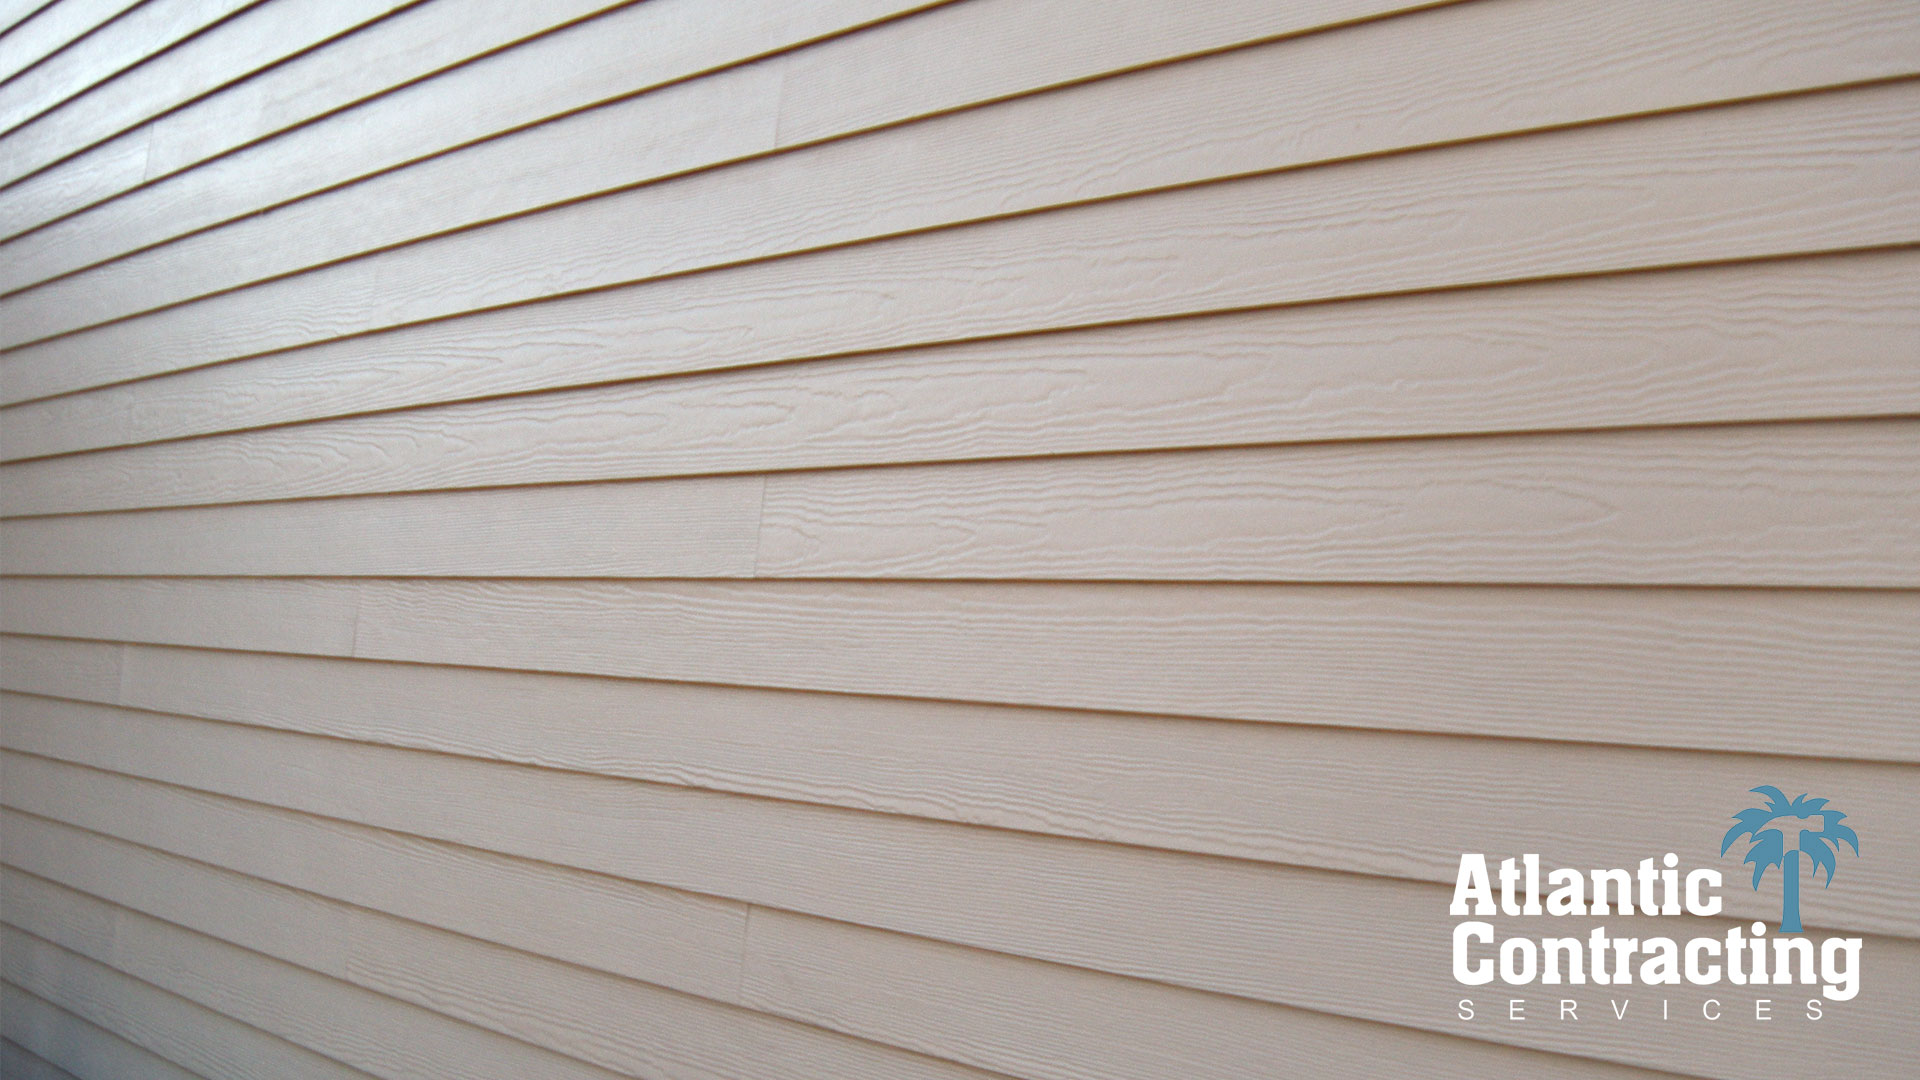 James Hardie Siding Contractor, Myrtle Beach : We Replaced Old Vinyl Siding with HardiPlank Siding